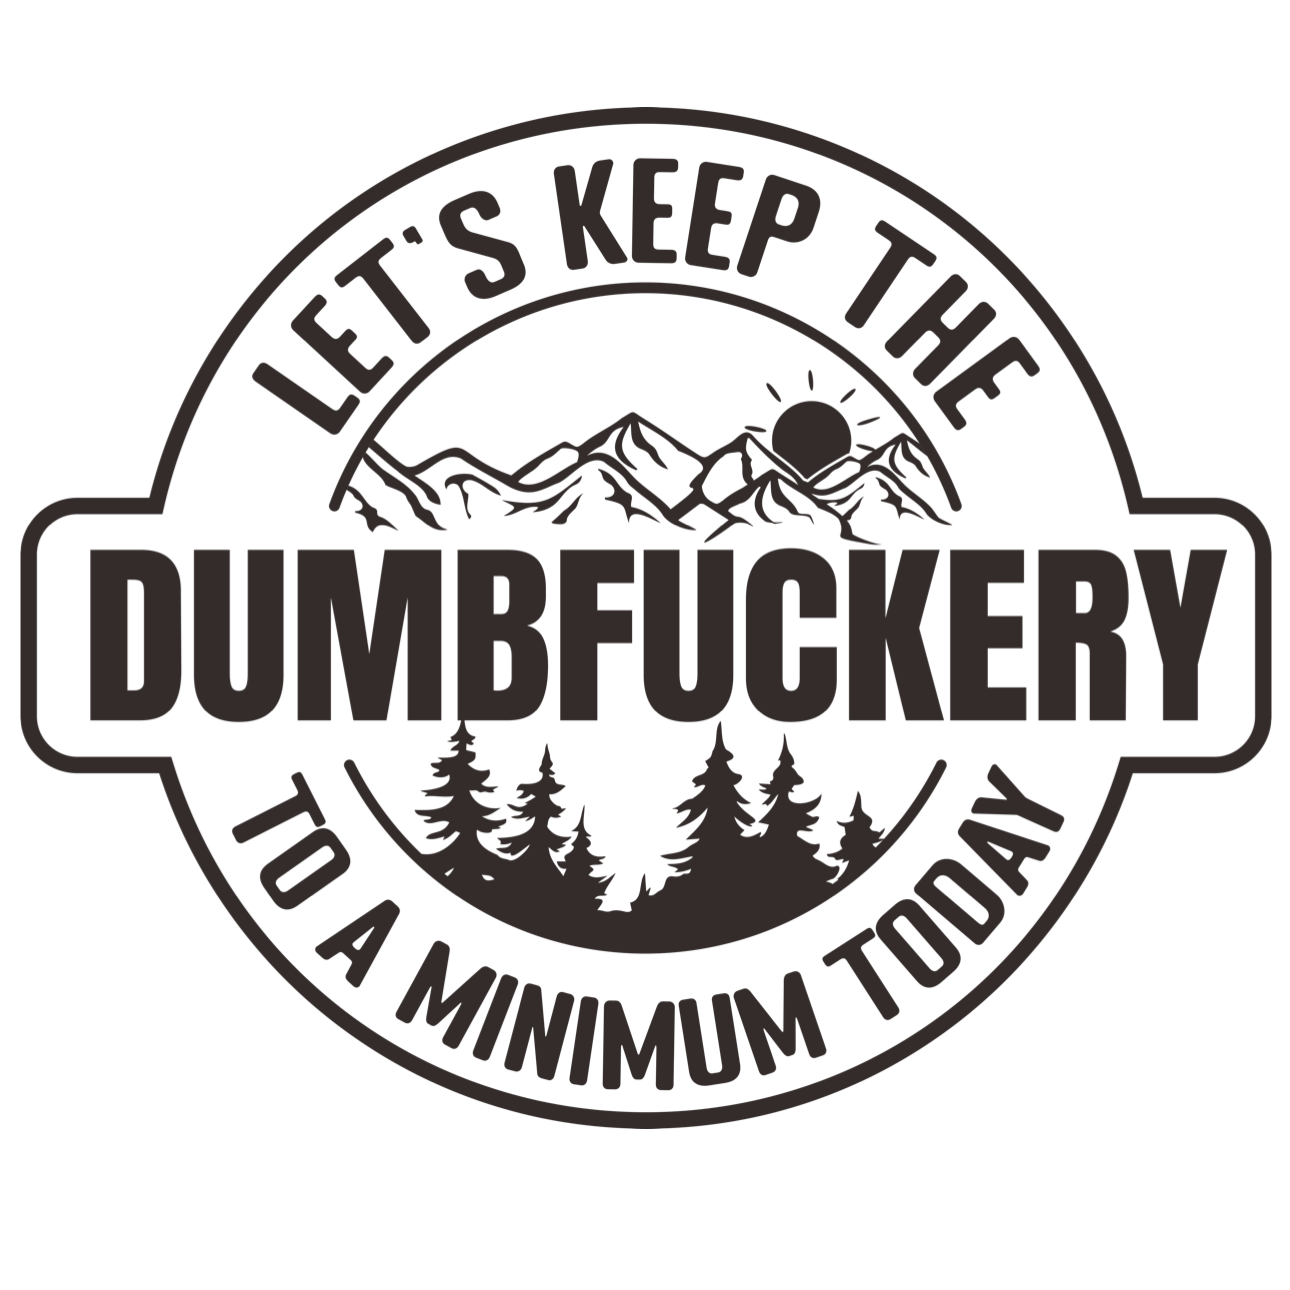 Let's Keep The DumbFuckery To A Minimum Today Vinyl Decal